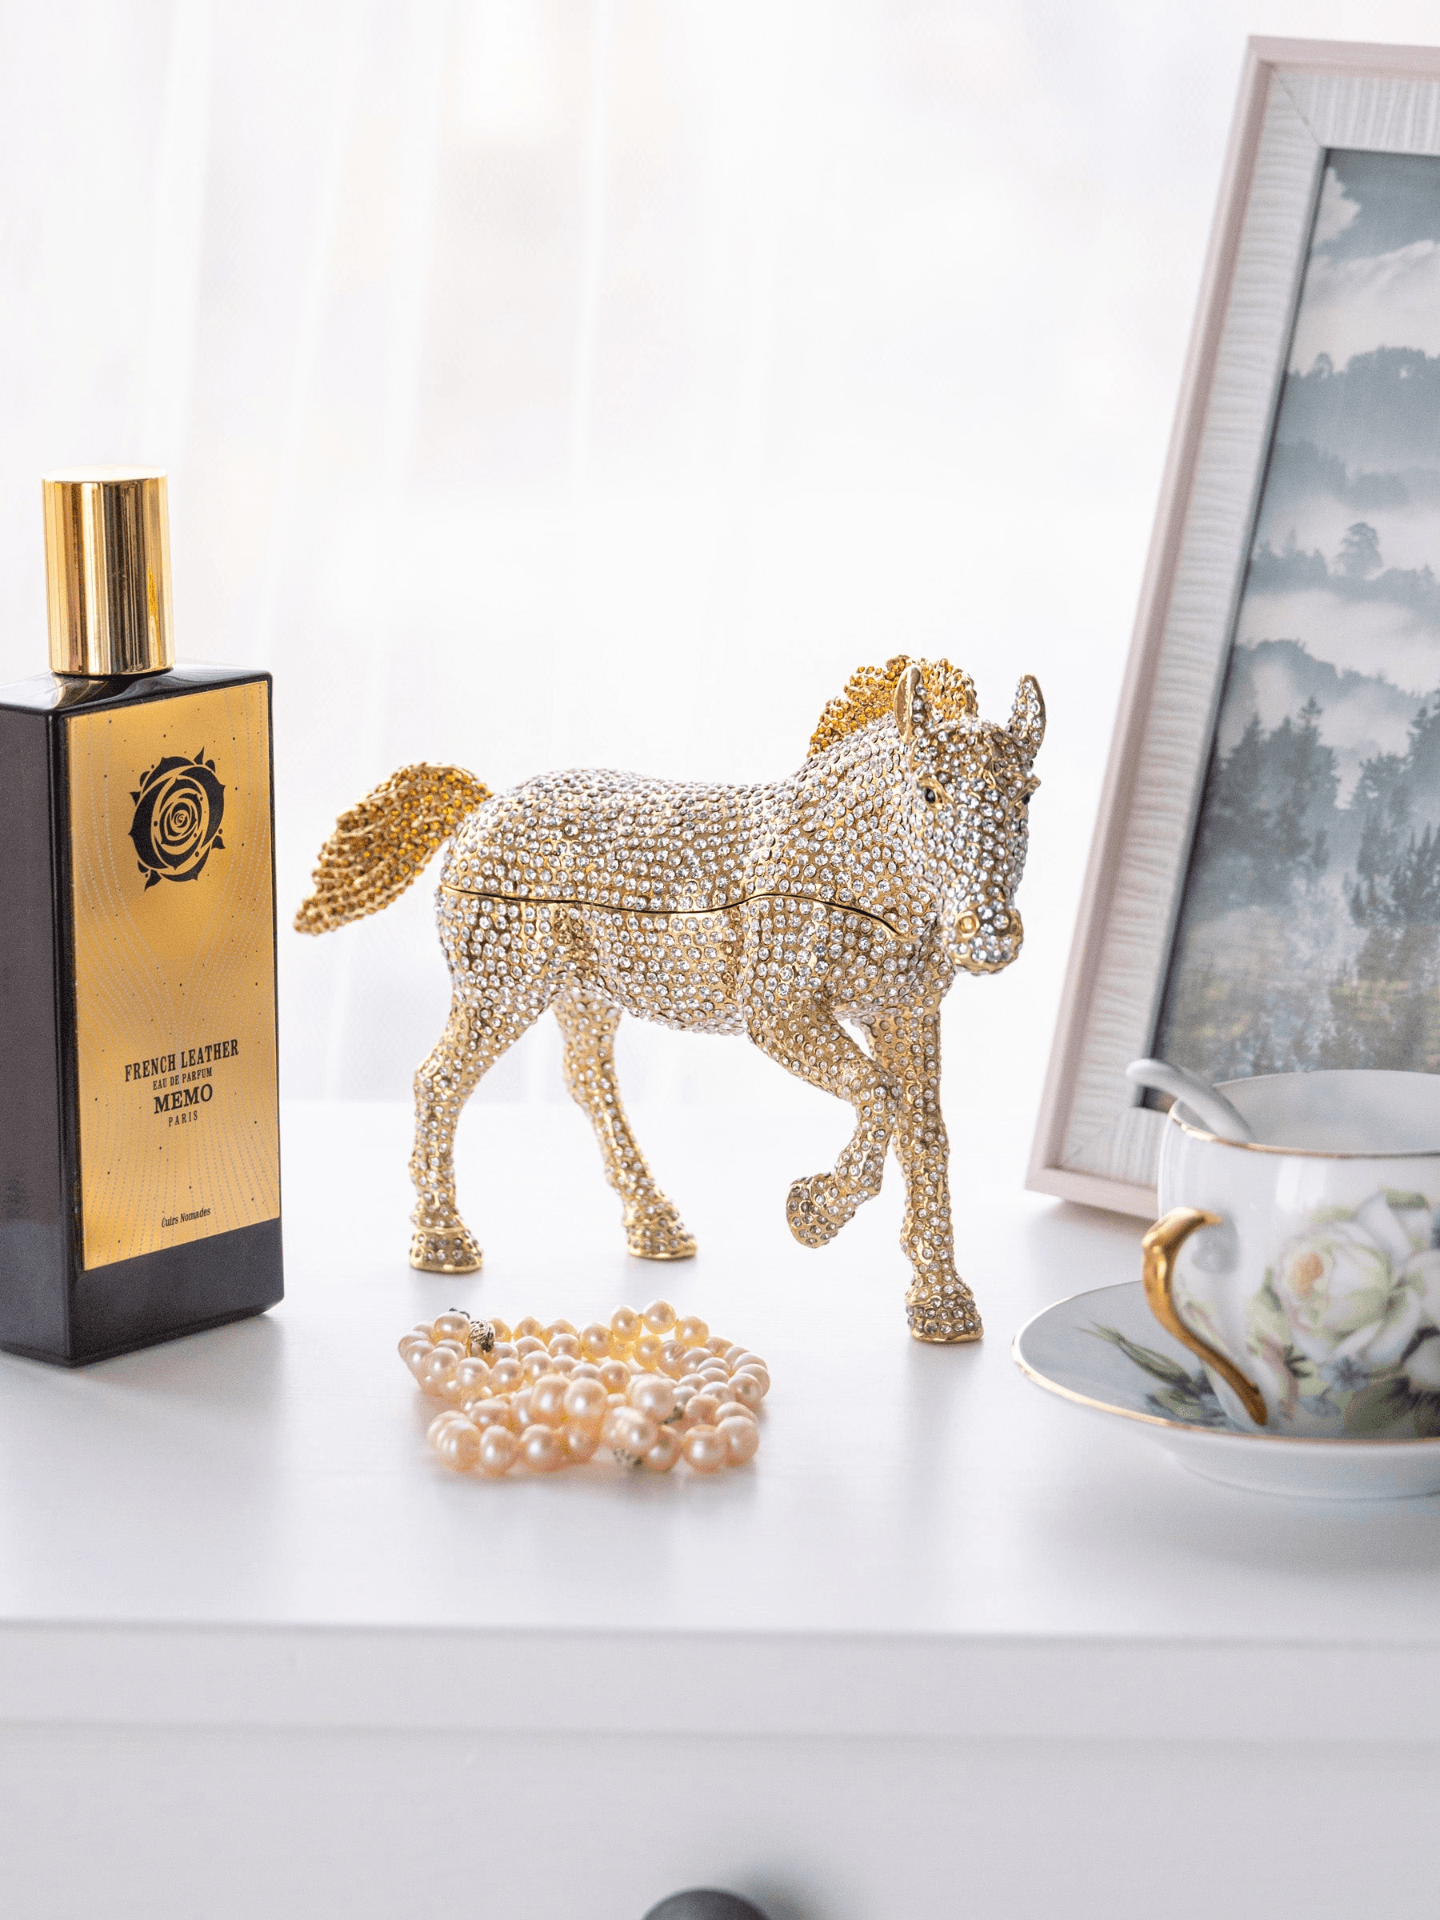 Large Golden Horse Decorated with White Crystals  